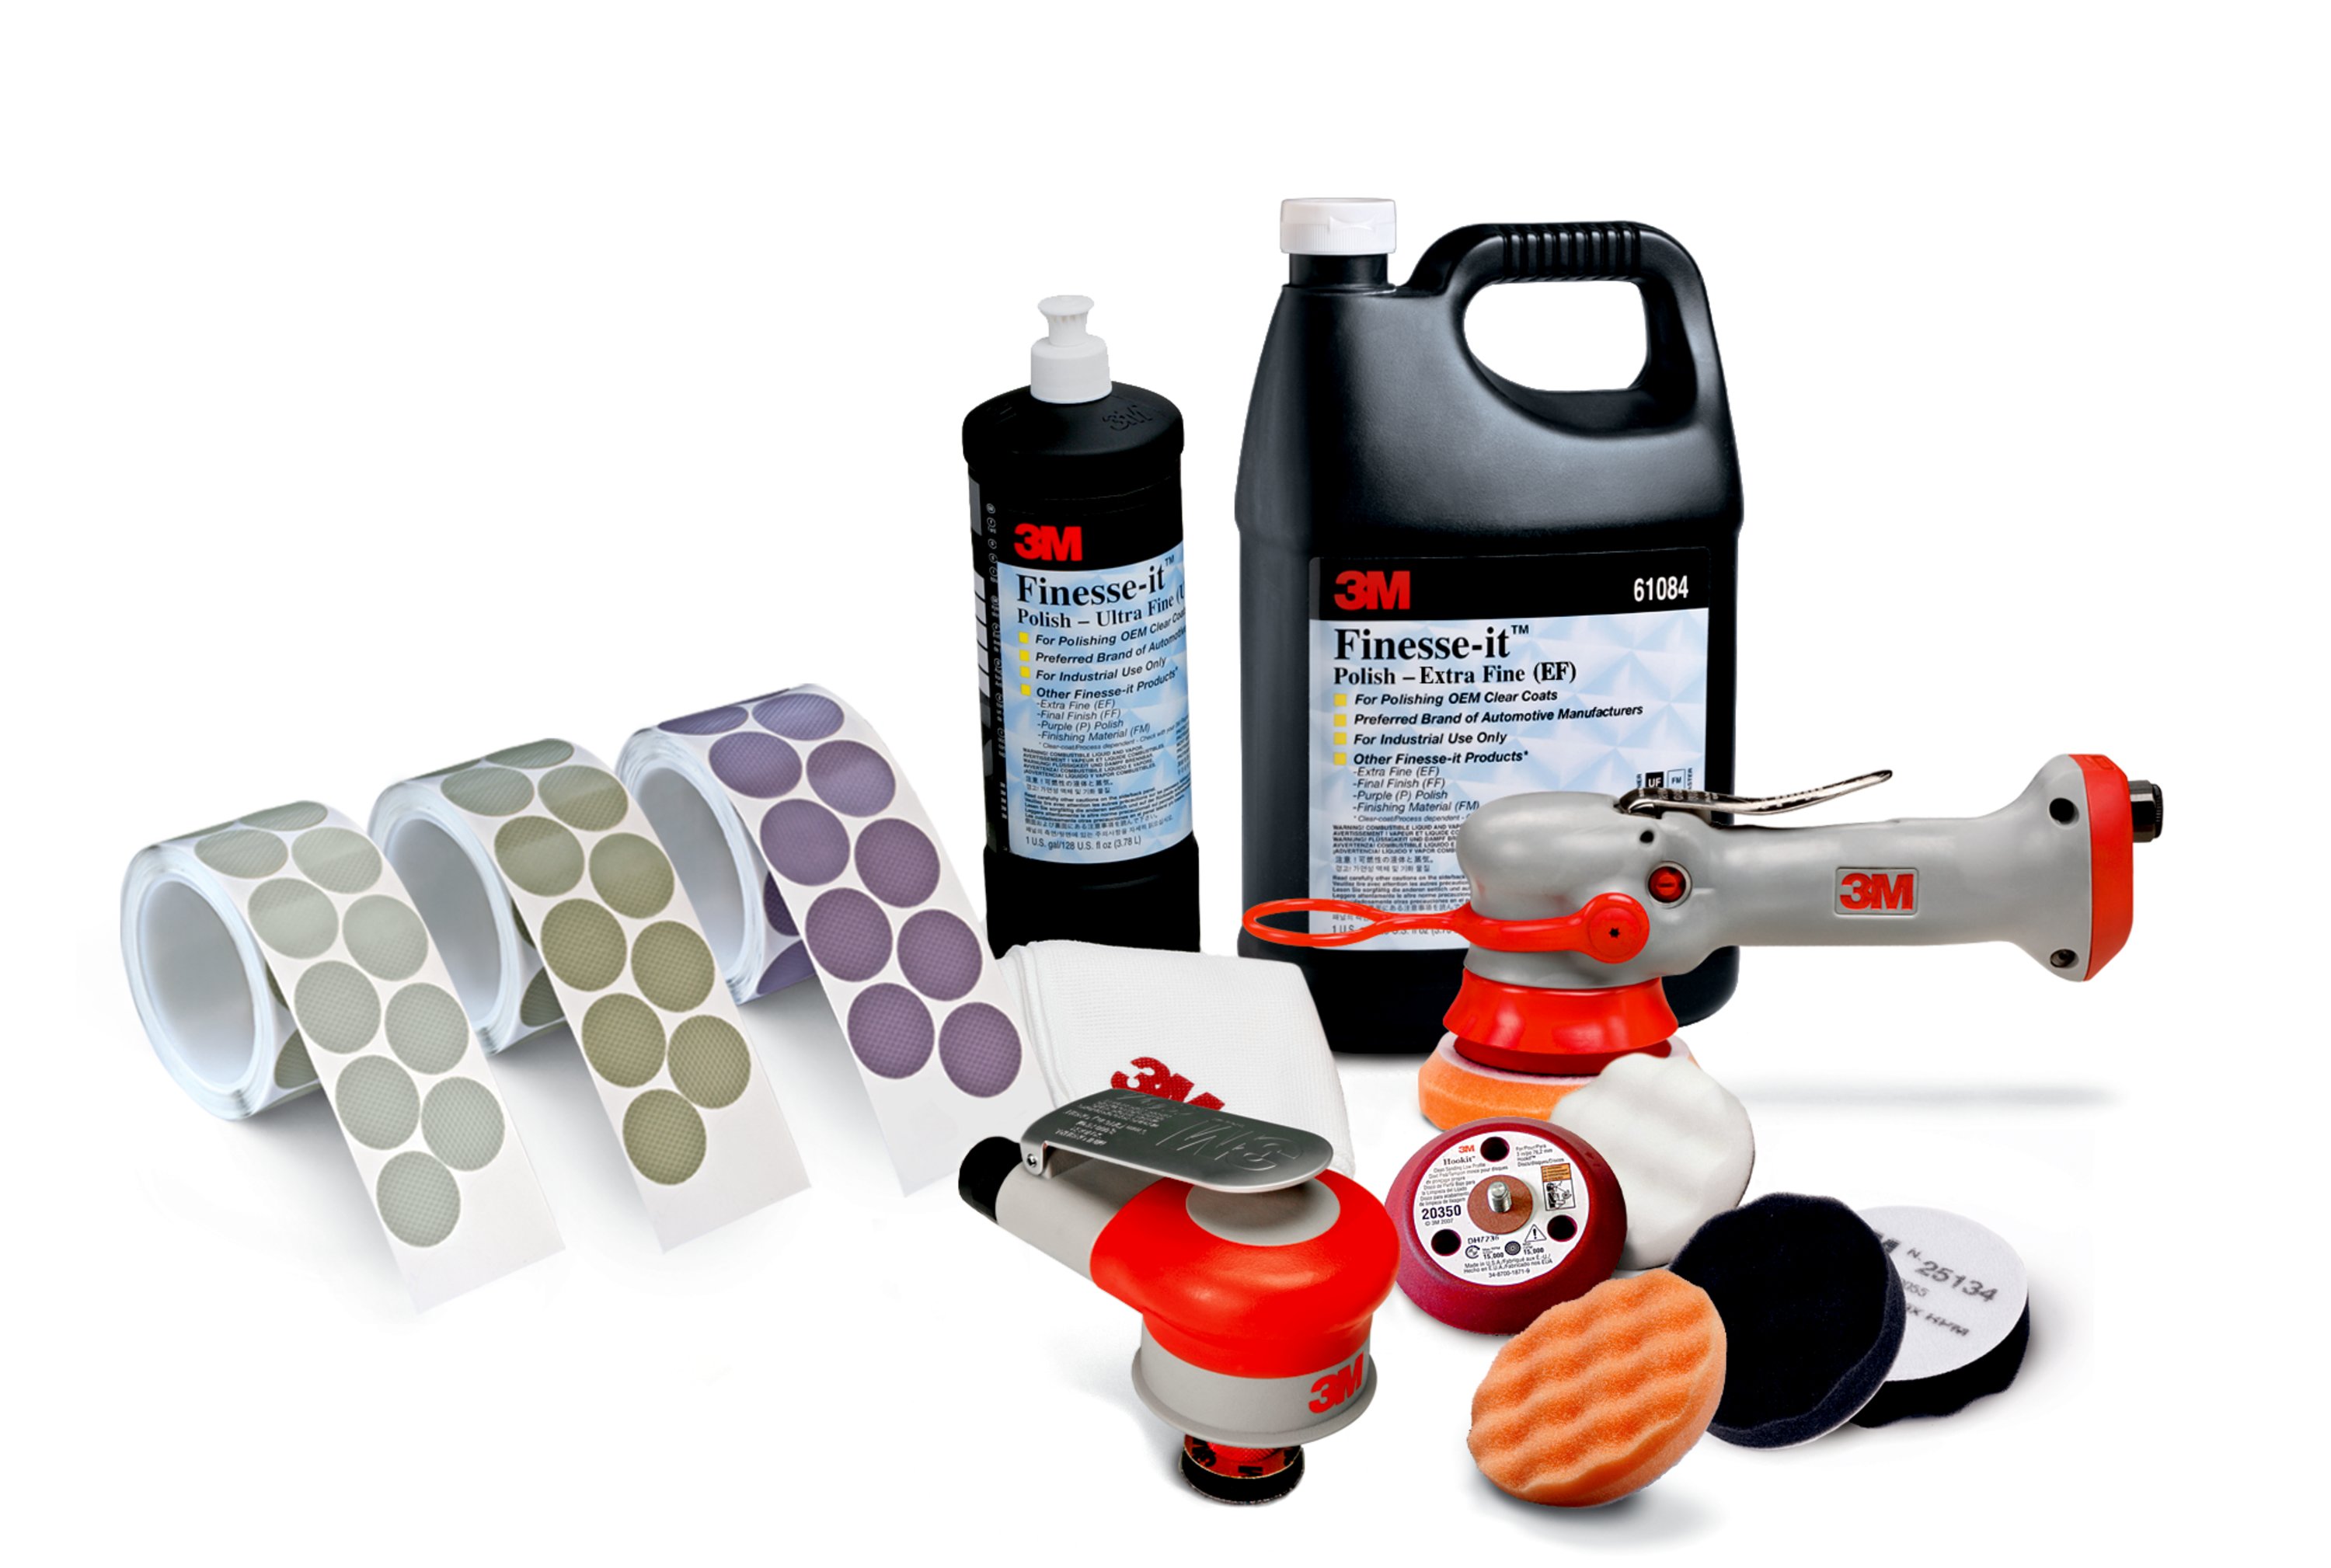 The 3M™ Mini Random Orbital Sander feels like an air-powered extension of your palm. Its 1-1/4 inch x 3/16 inch diameter orbit lets you sand in very specific or hard-to-reach areas, ideal for removing small defects in painted surfaces and clear coats without having to sand, compound and polish entire panels.